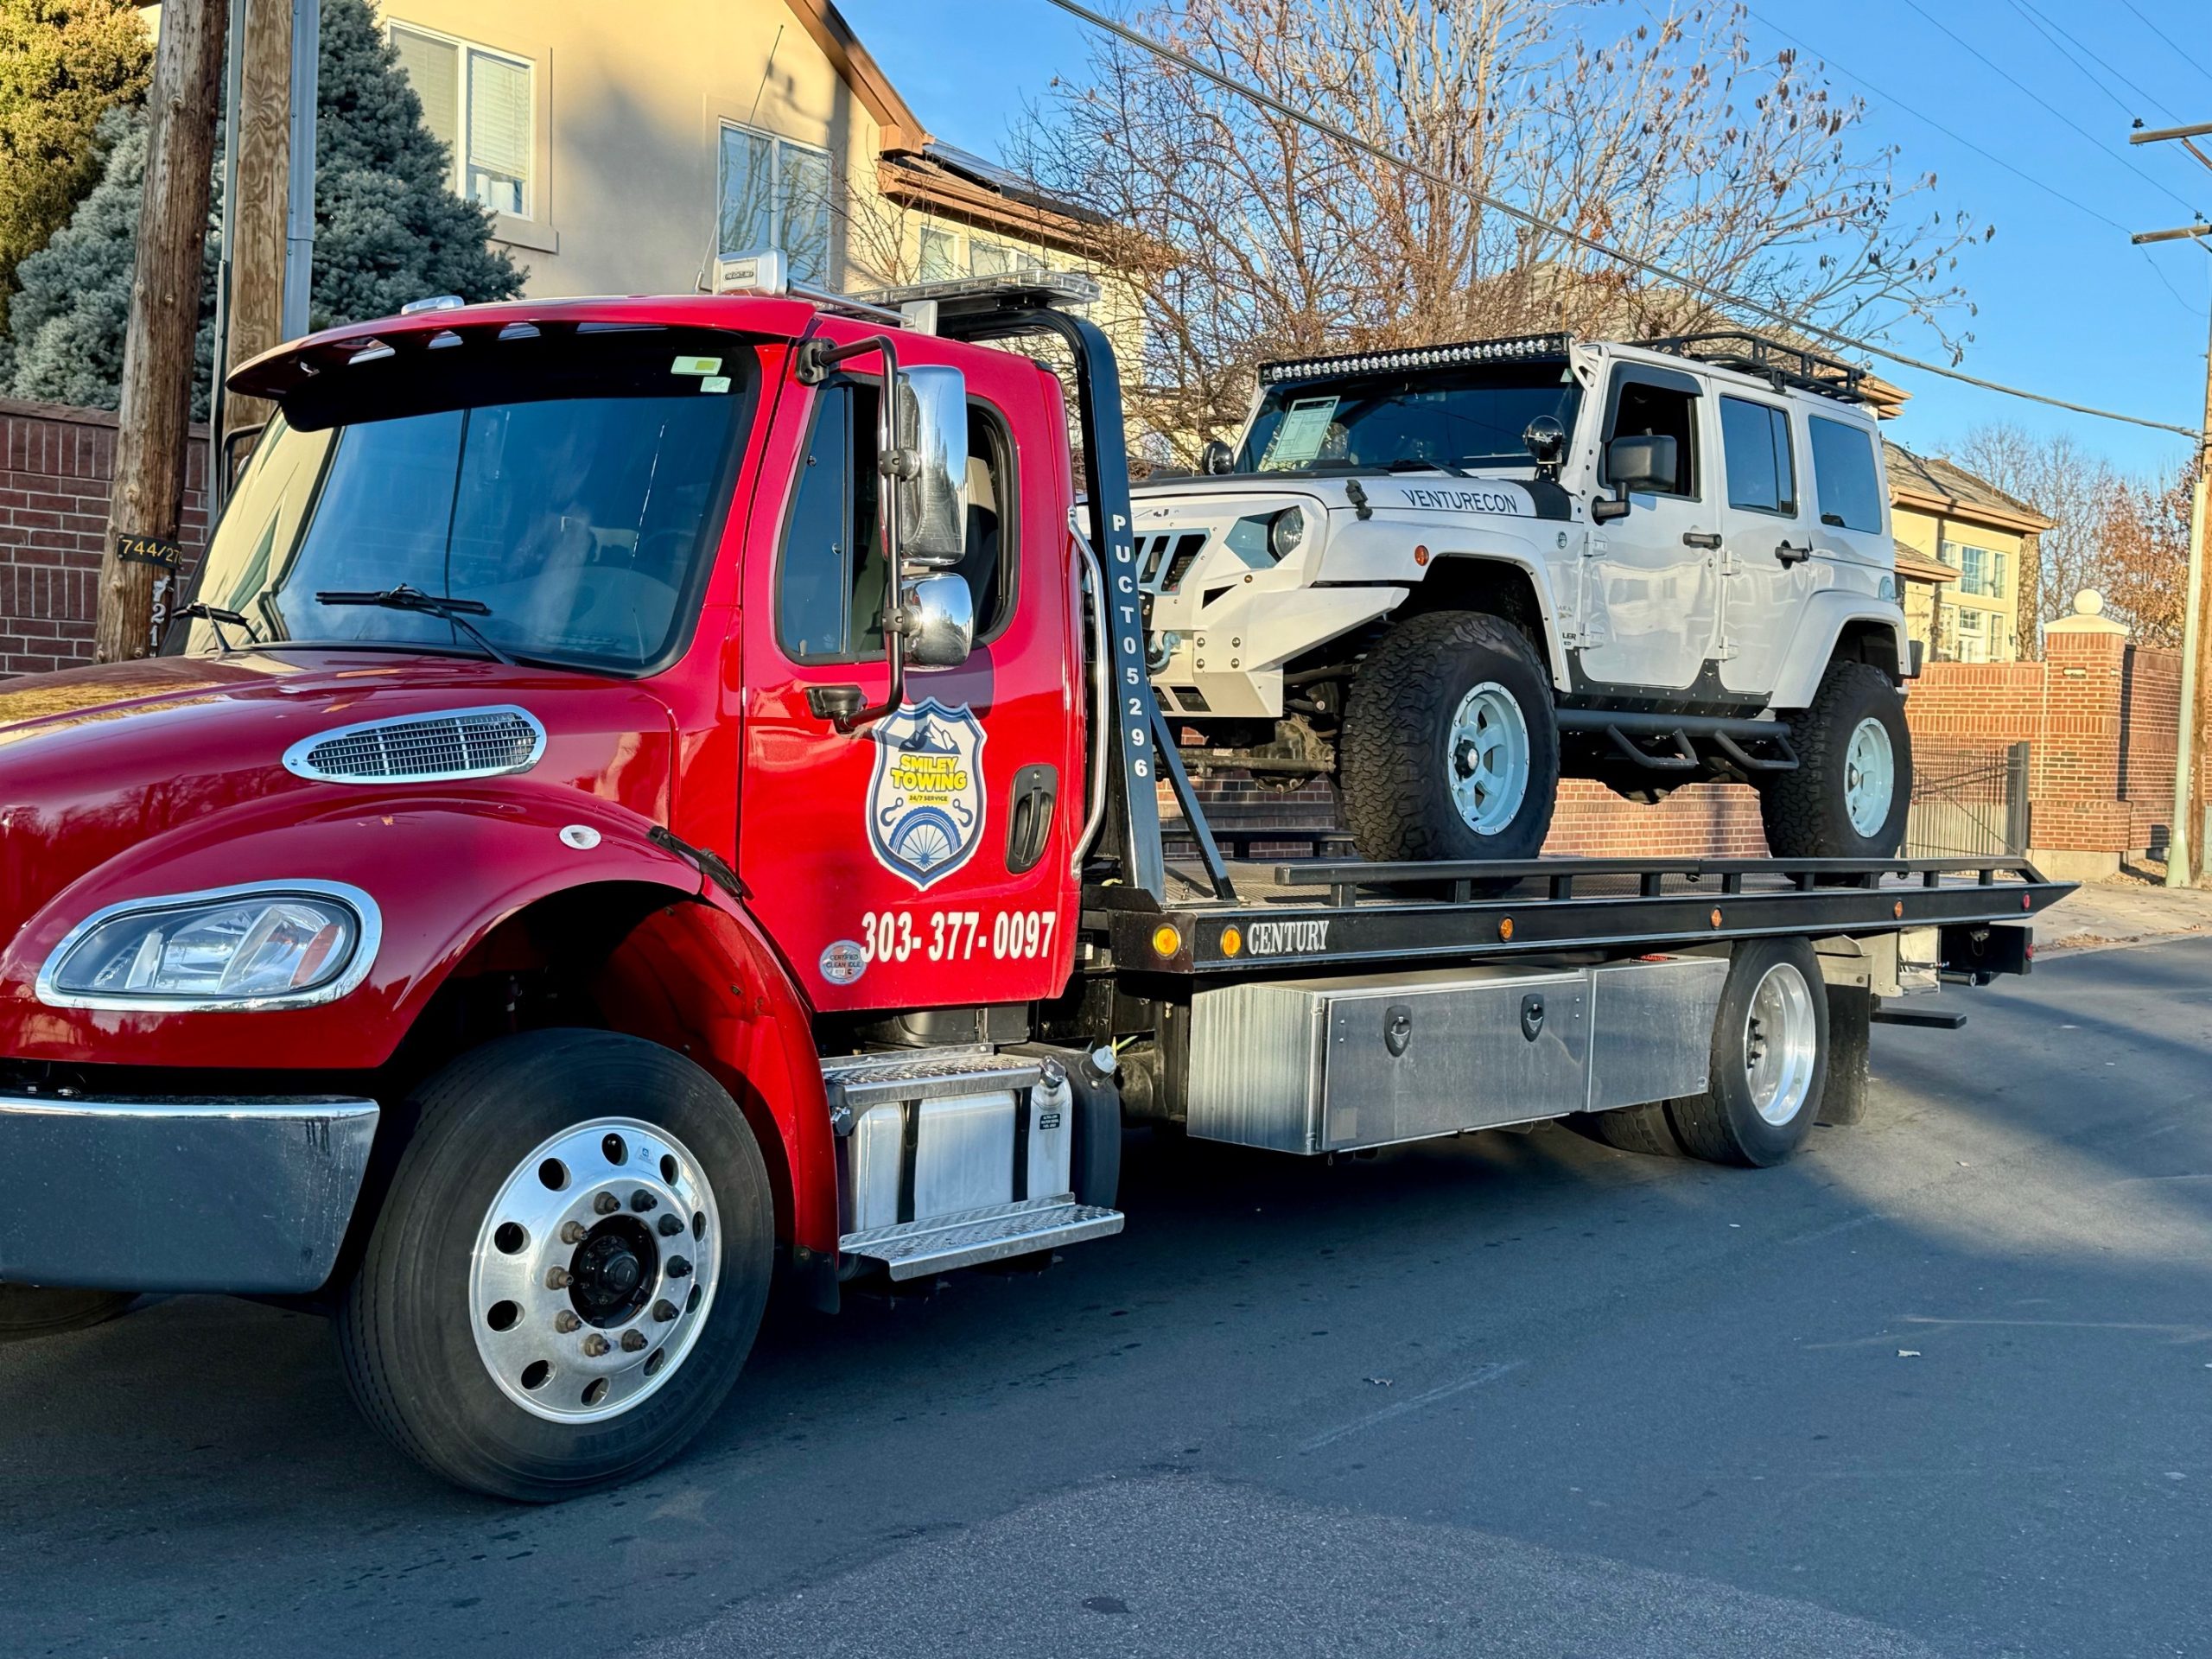 this image shows towing services in Henderson, CO